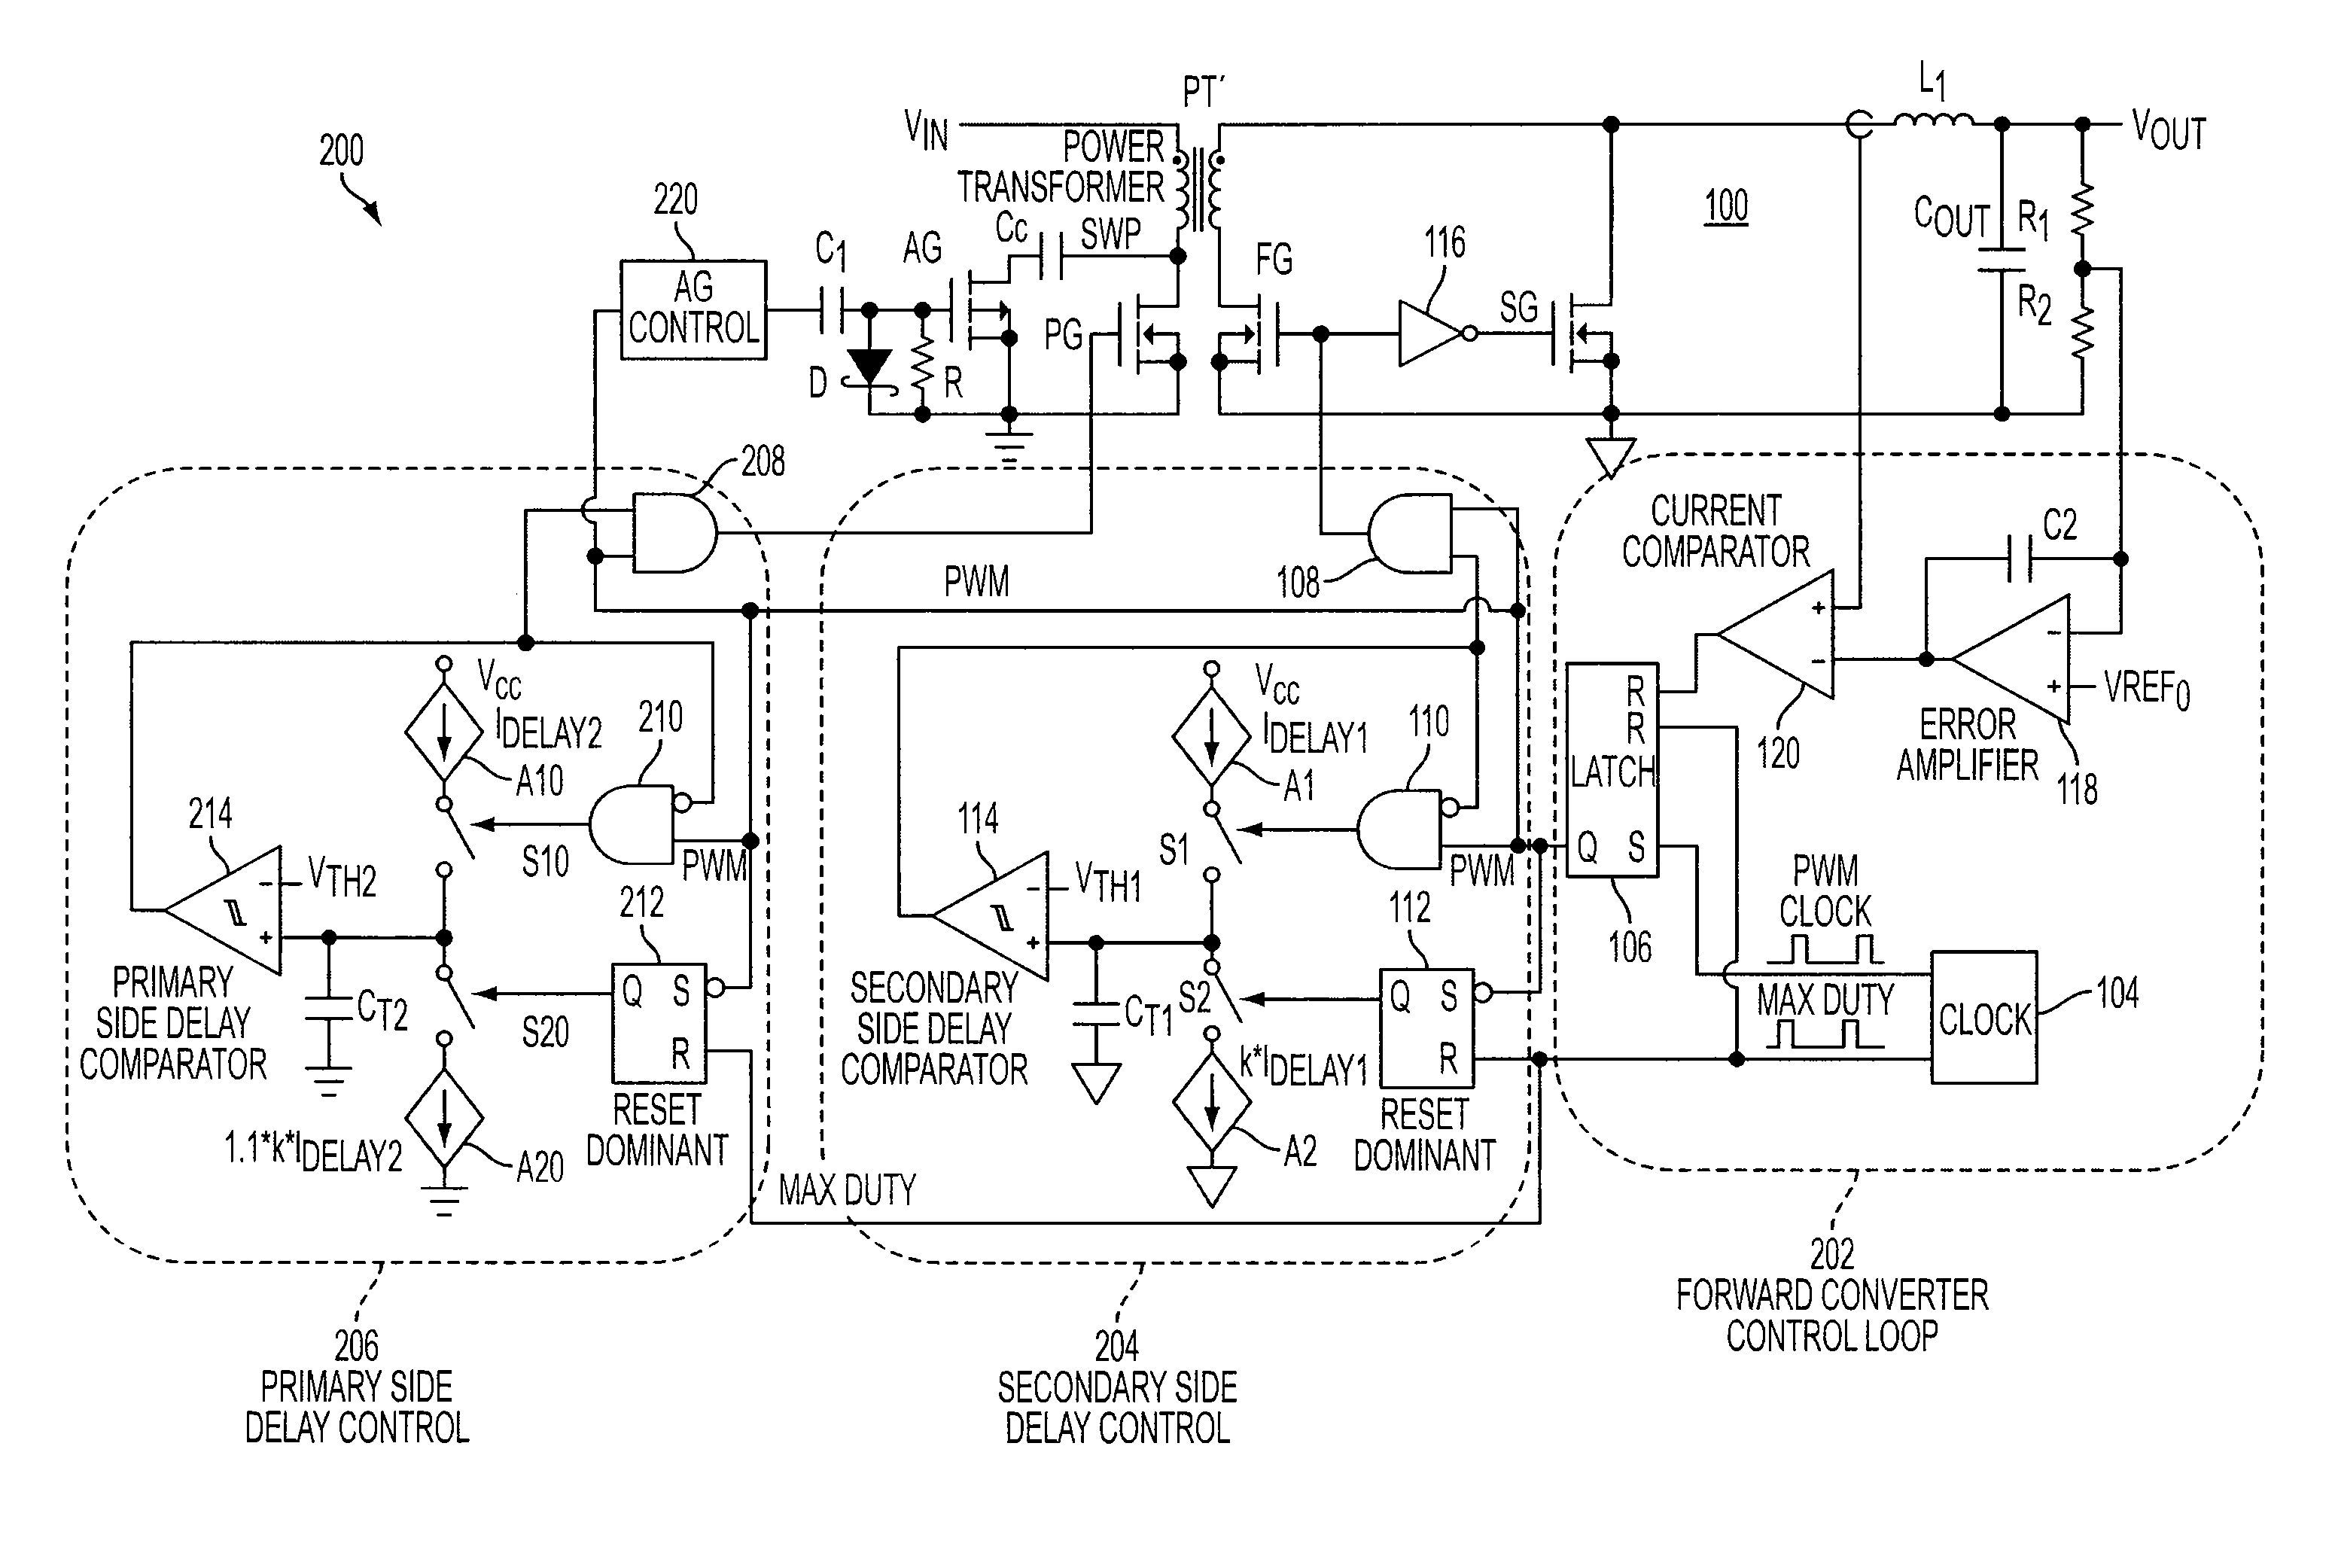 Extending achievable duty cycle range in dc/dc forward converter with active clamp reset